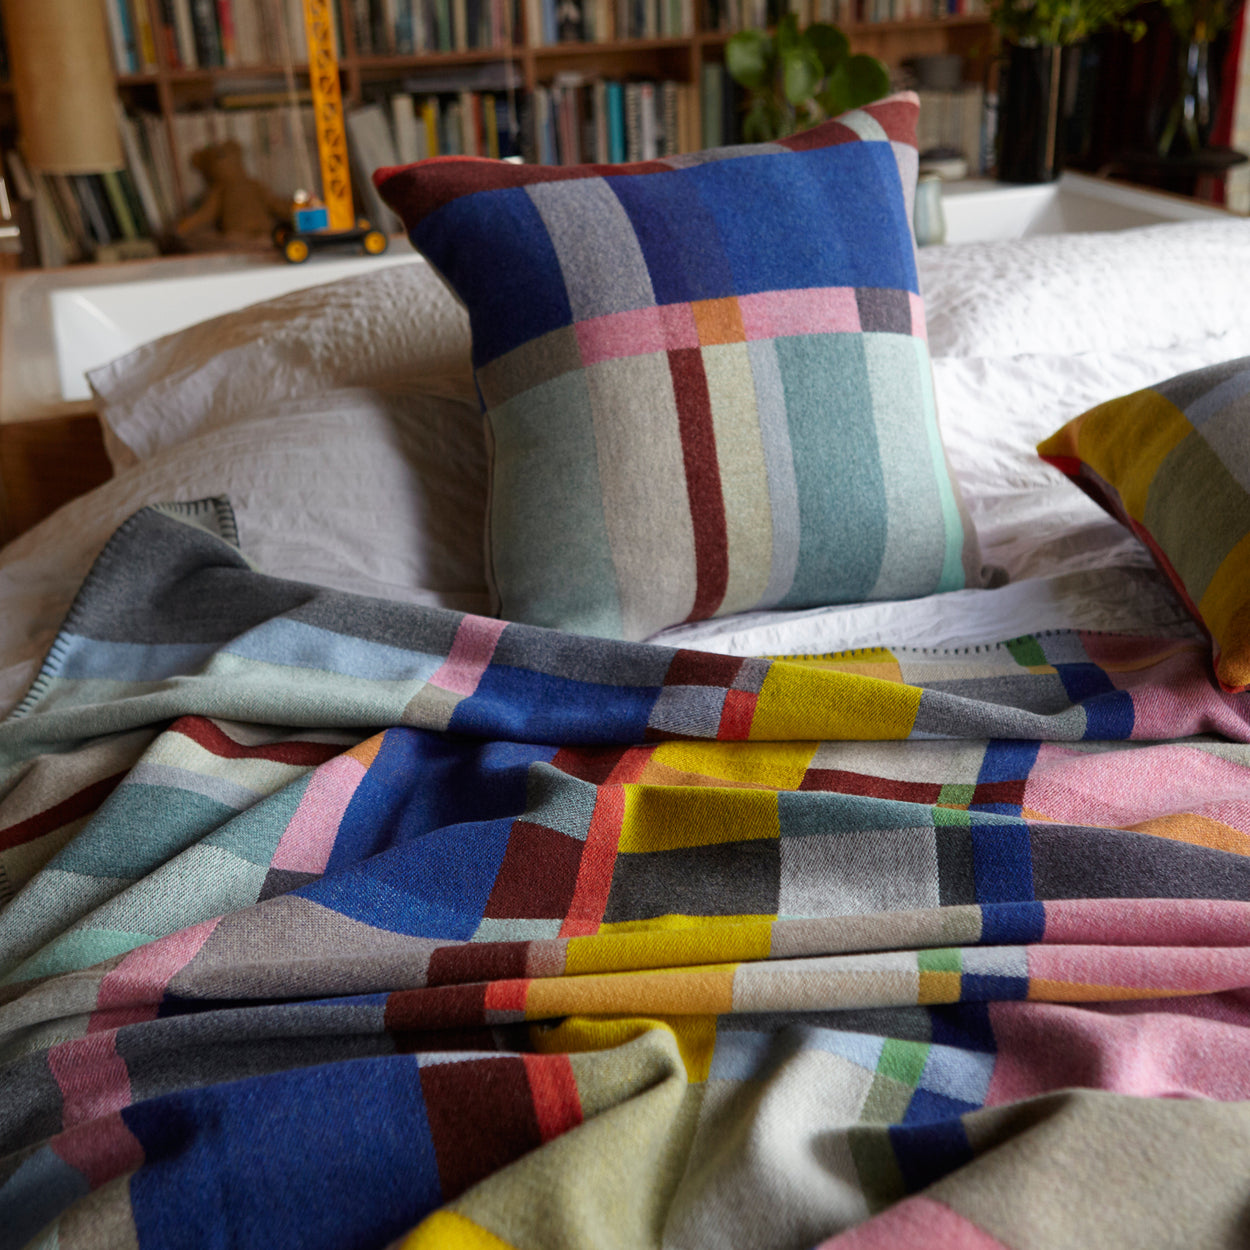 Premium Merino wool cushion cover in Lloyd with blankets on strewn top of bed